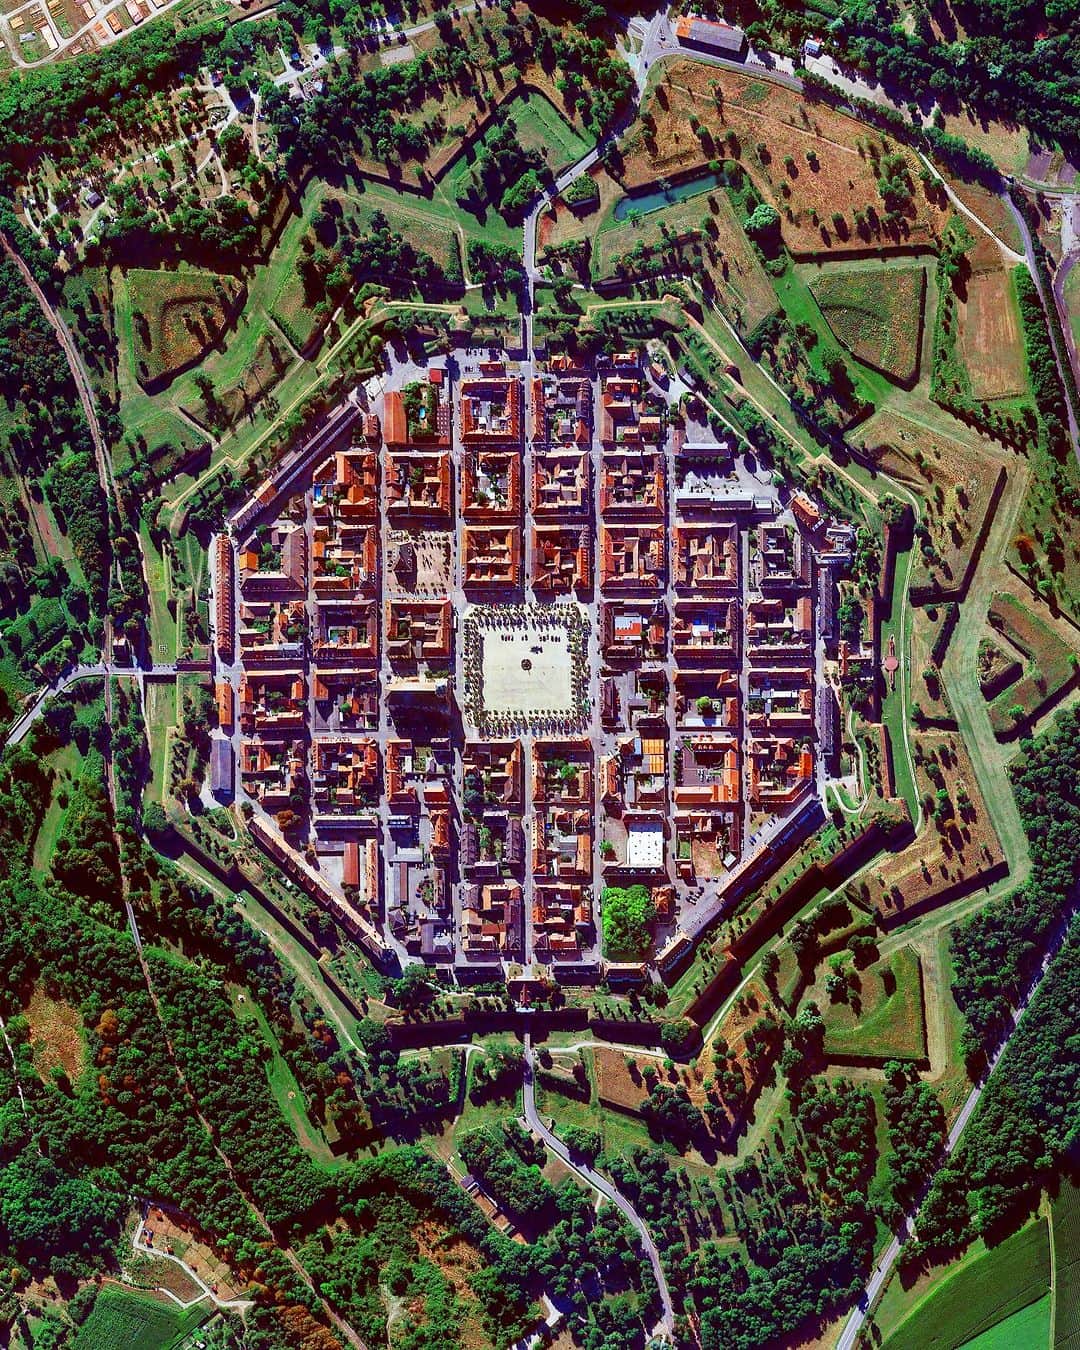 Daily Overviewのインスタグラム：「Neuf-Brisach is a fortified town and commune in the Alsace region of eastern France. Built in 1697, it was intended to guard the border between France and the Holy Roman Empire and, subsequently, the German states. Neuf-Brisach is perfectly octagonal, divided into 48 blocks set around the central parade ground, and is home to nearly 2,000 people.  Created by @dailyoverview Source imagery: @maxartechnologies」